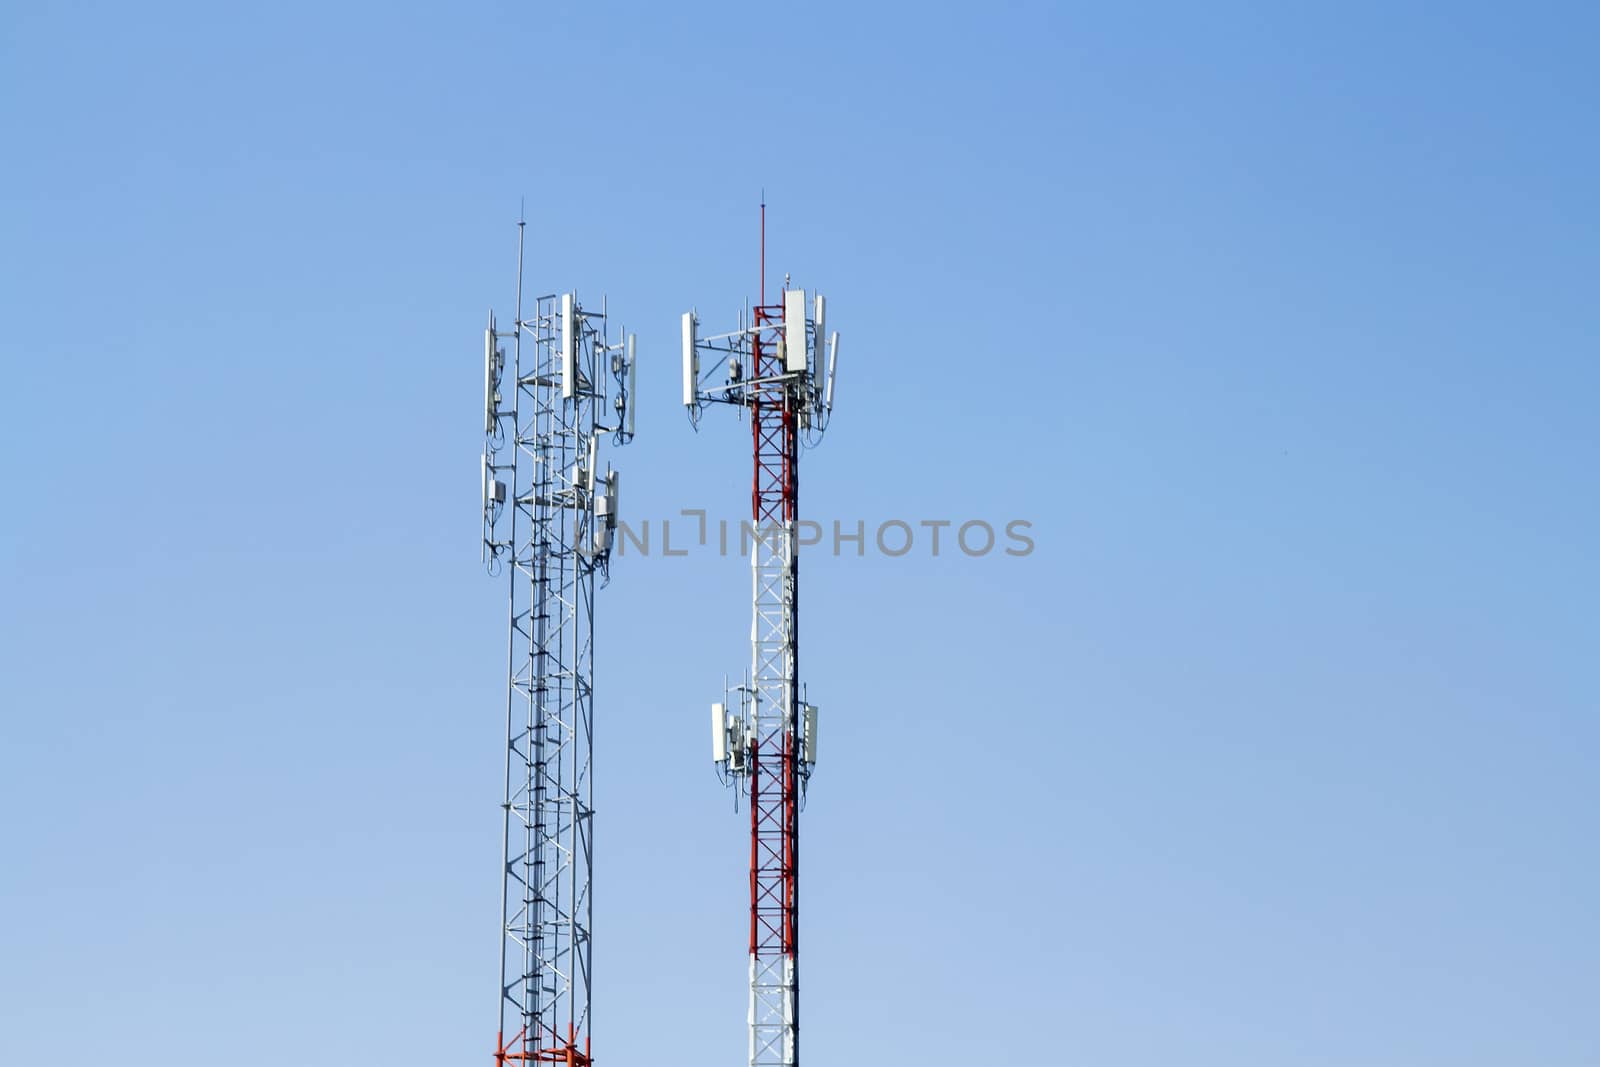 Mobile phone communication tower transmission  signal with blue sky background and antenna and twin